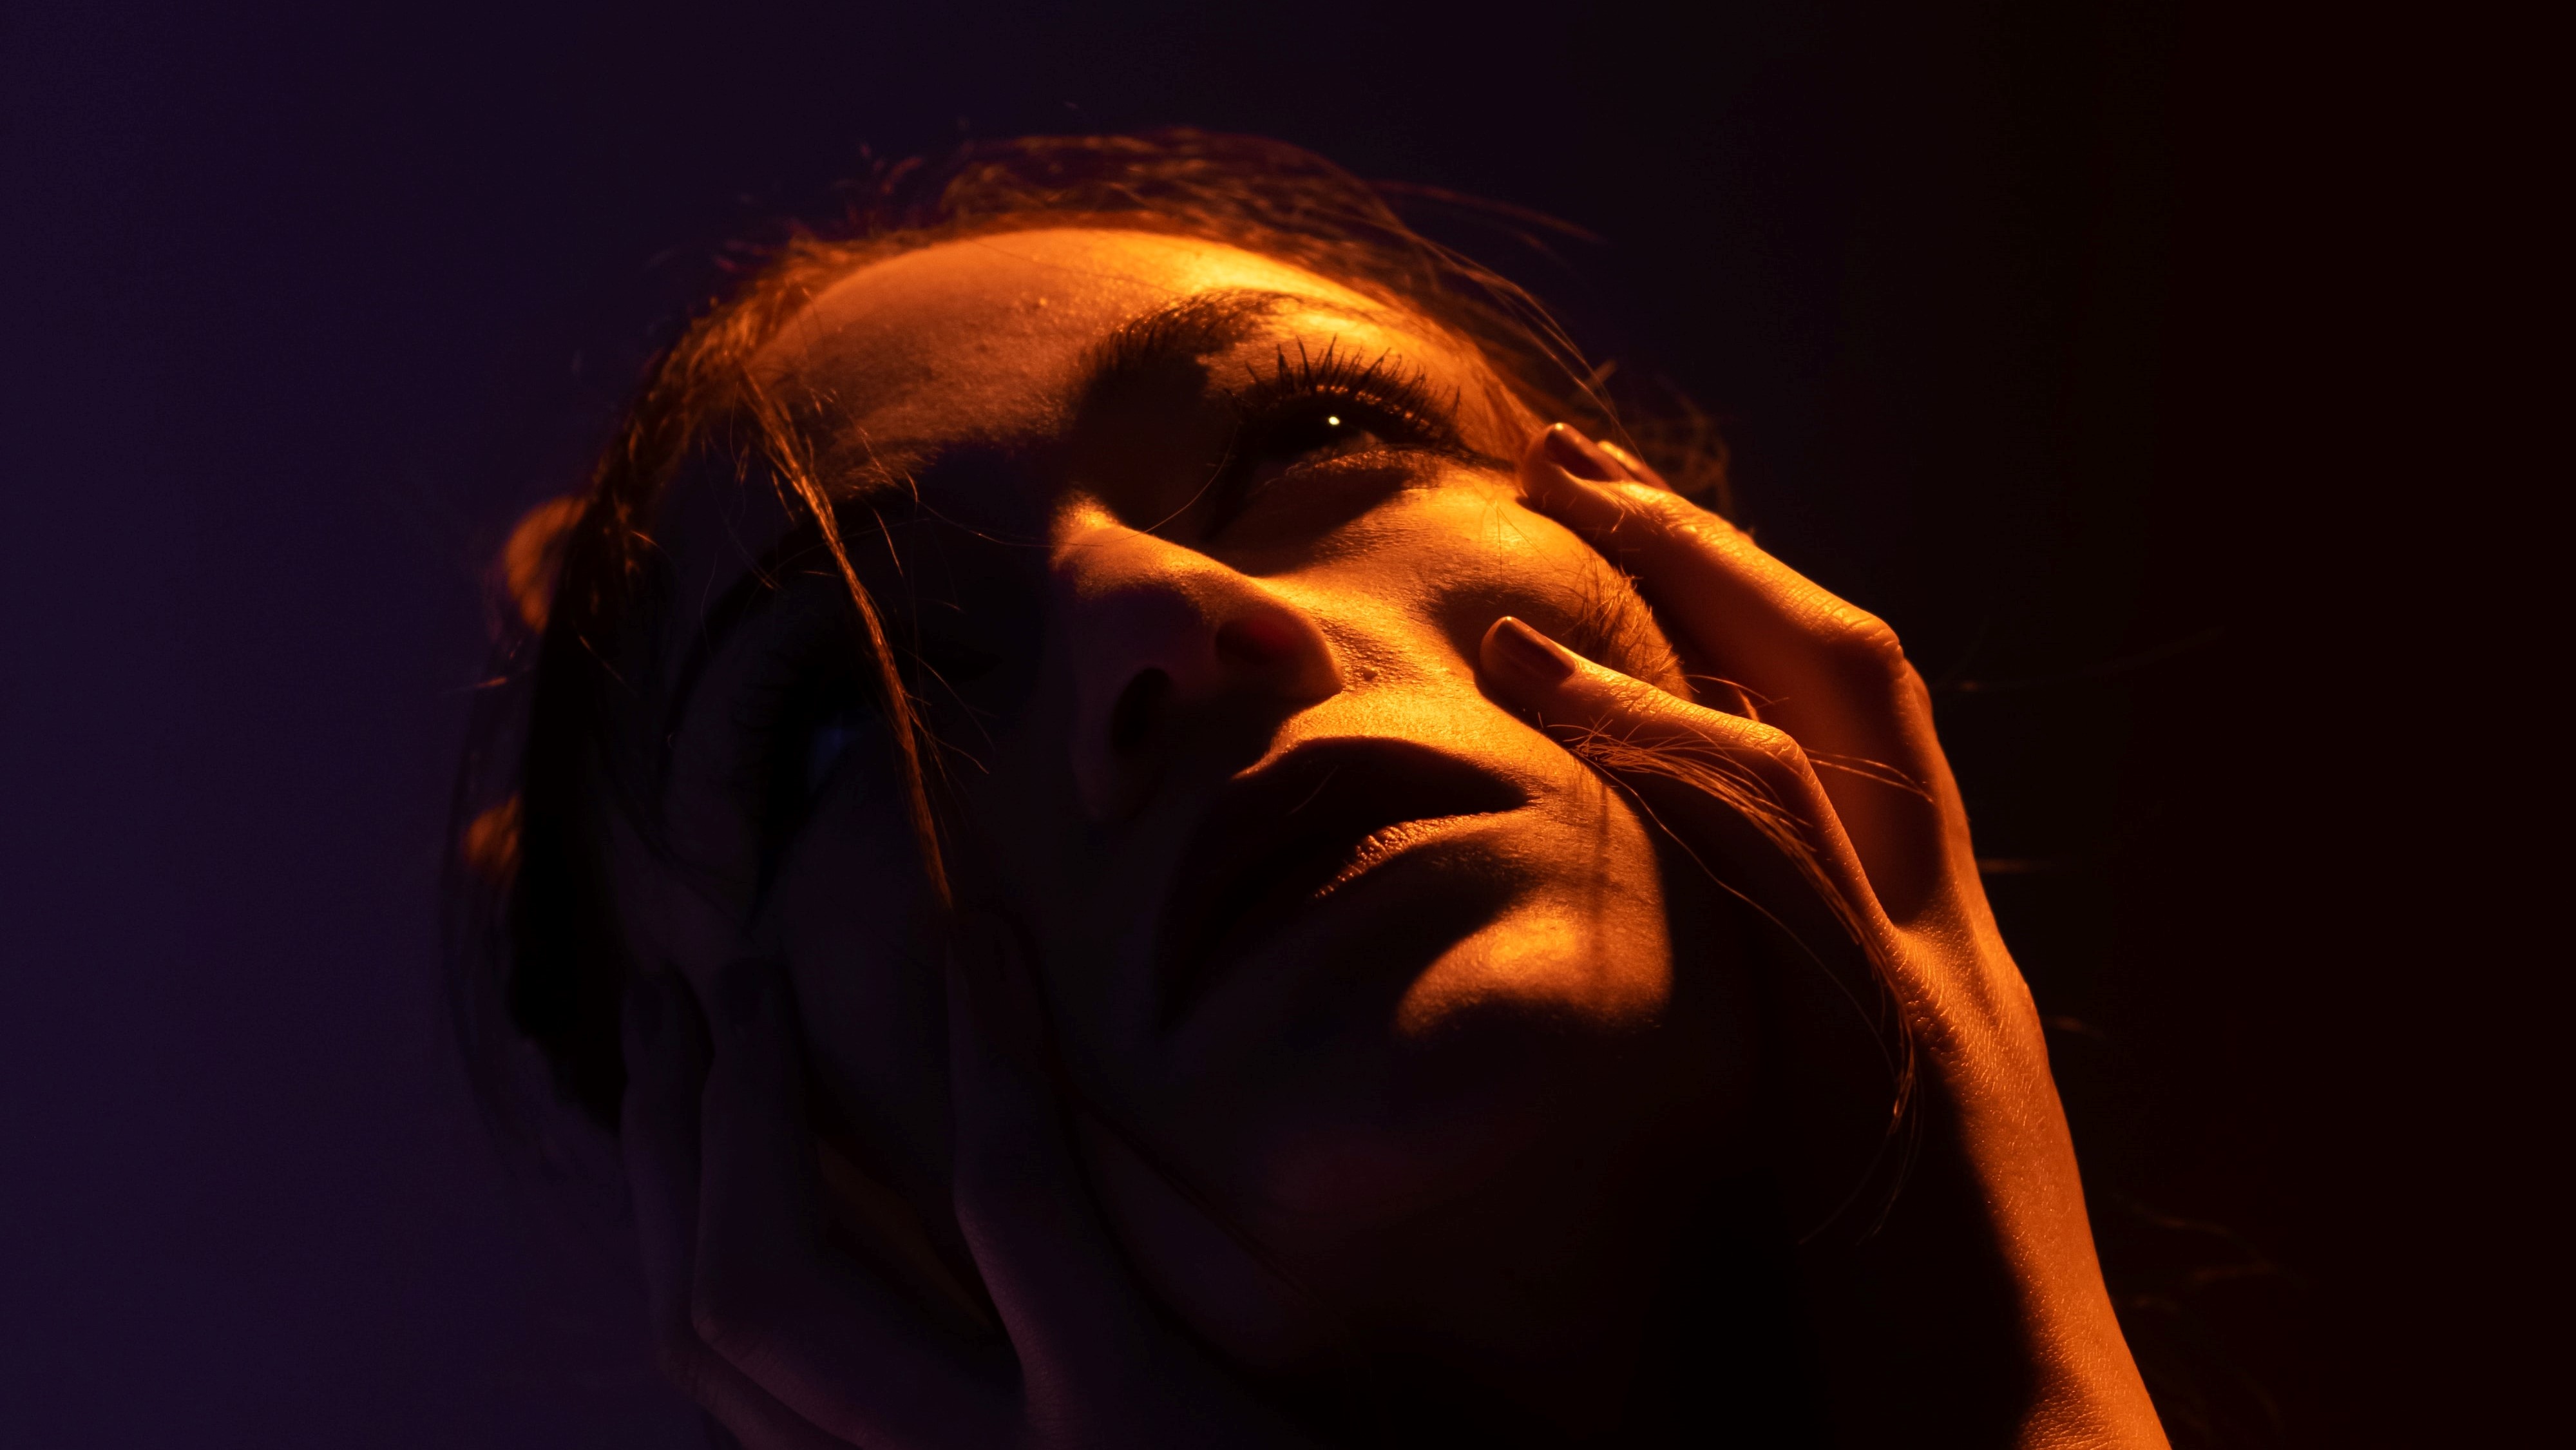 Woman clutching at her half-lit face